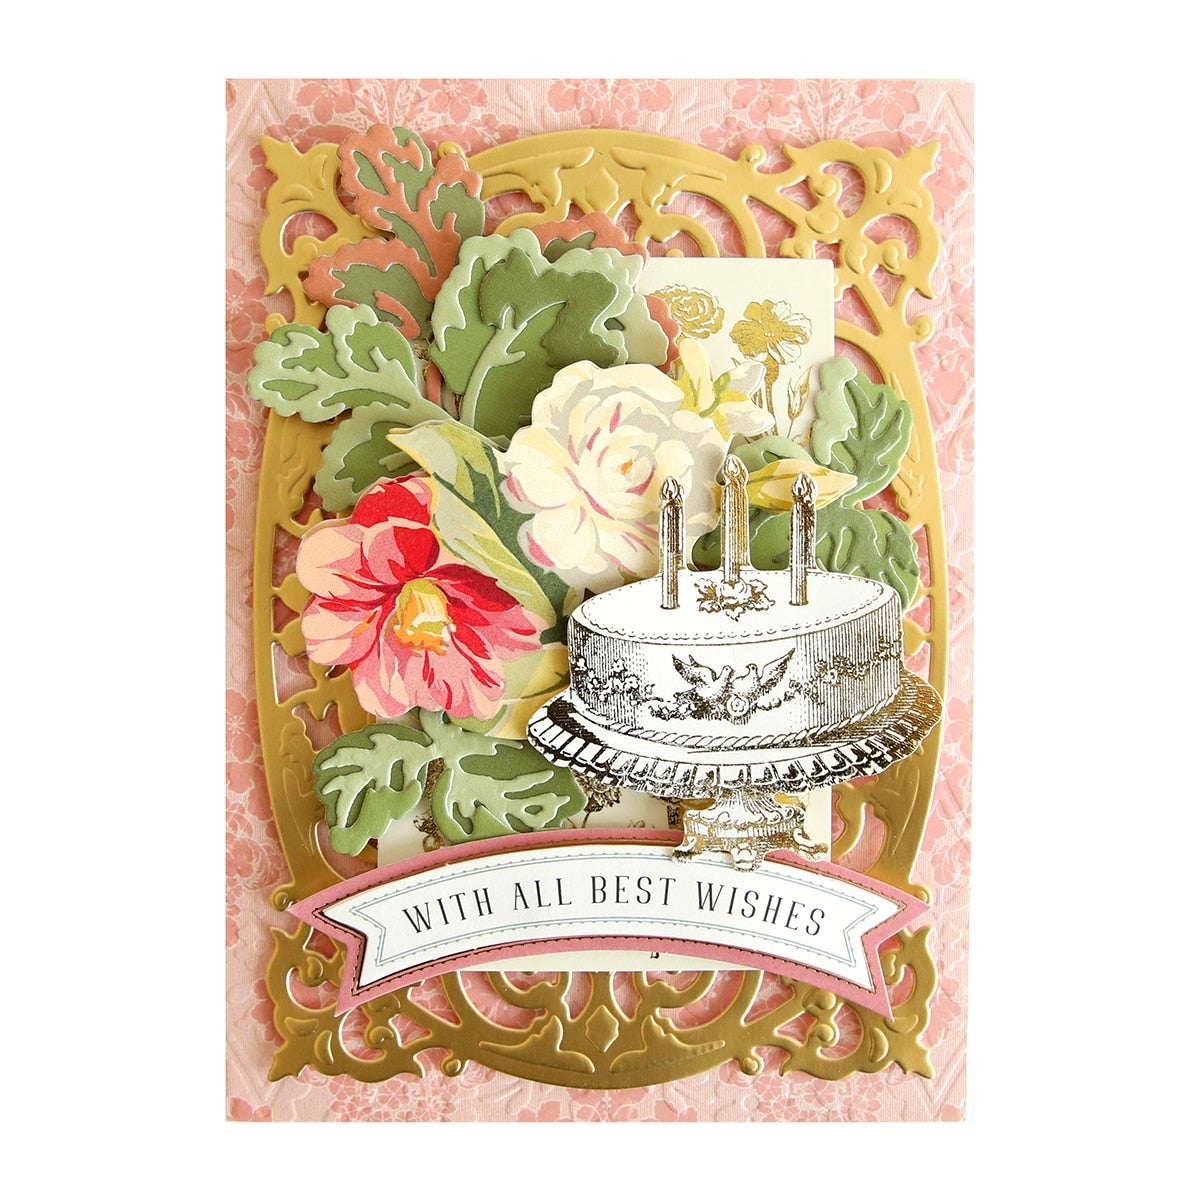 a card with a cake and flowers on it.